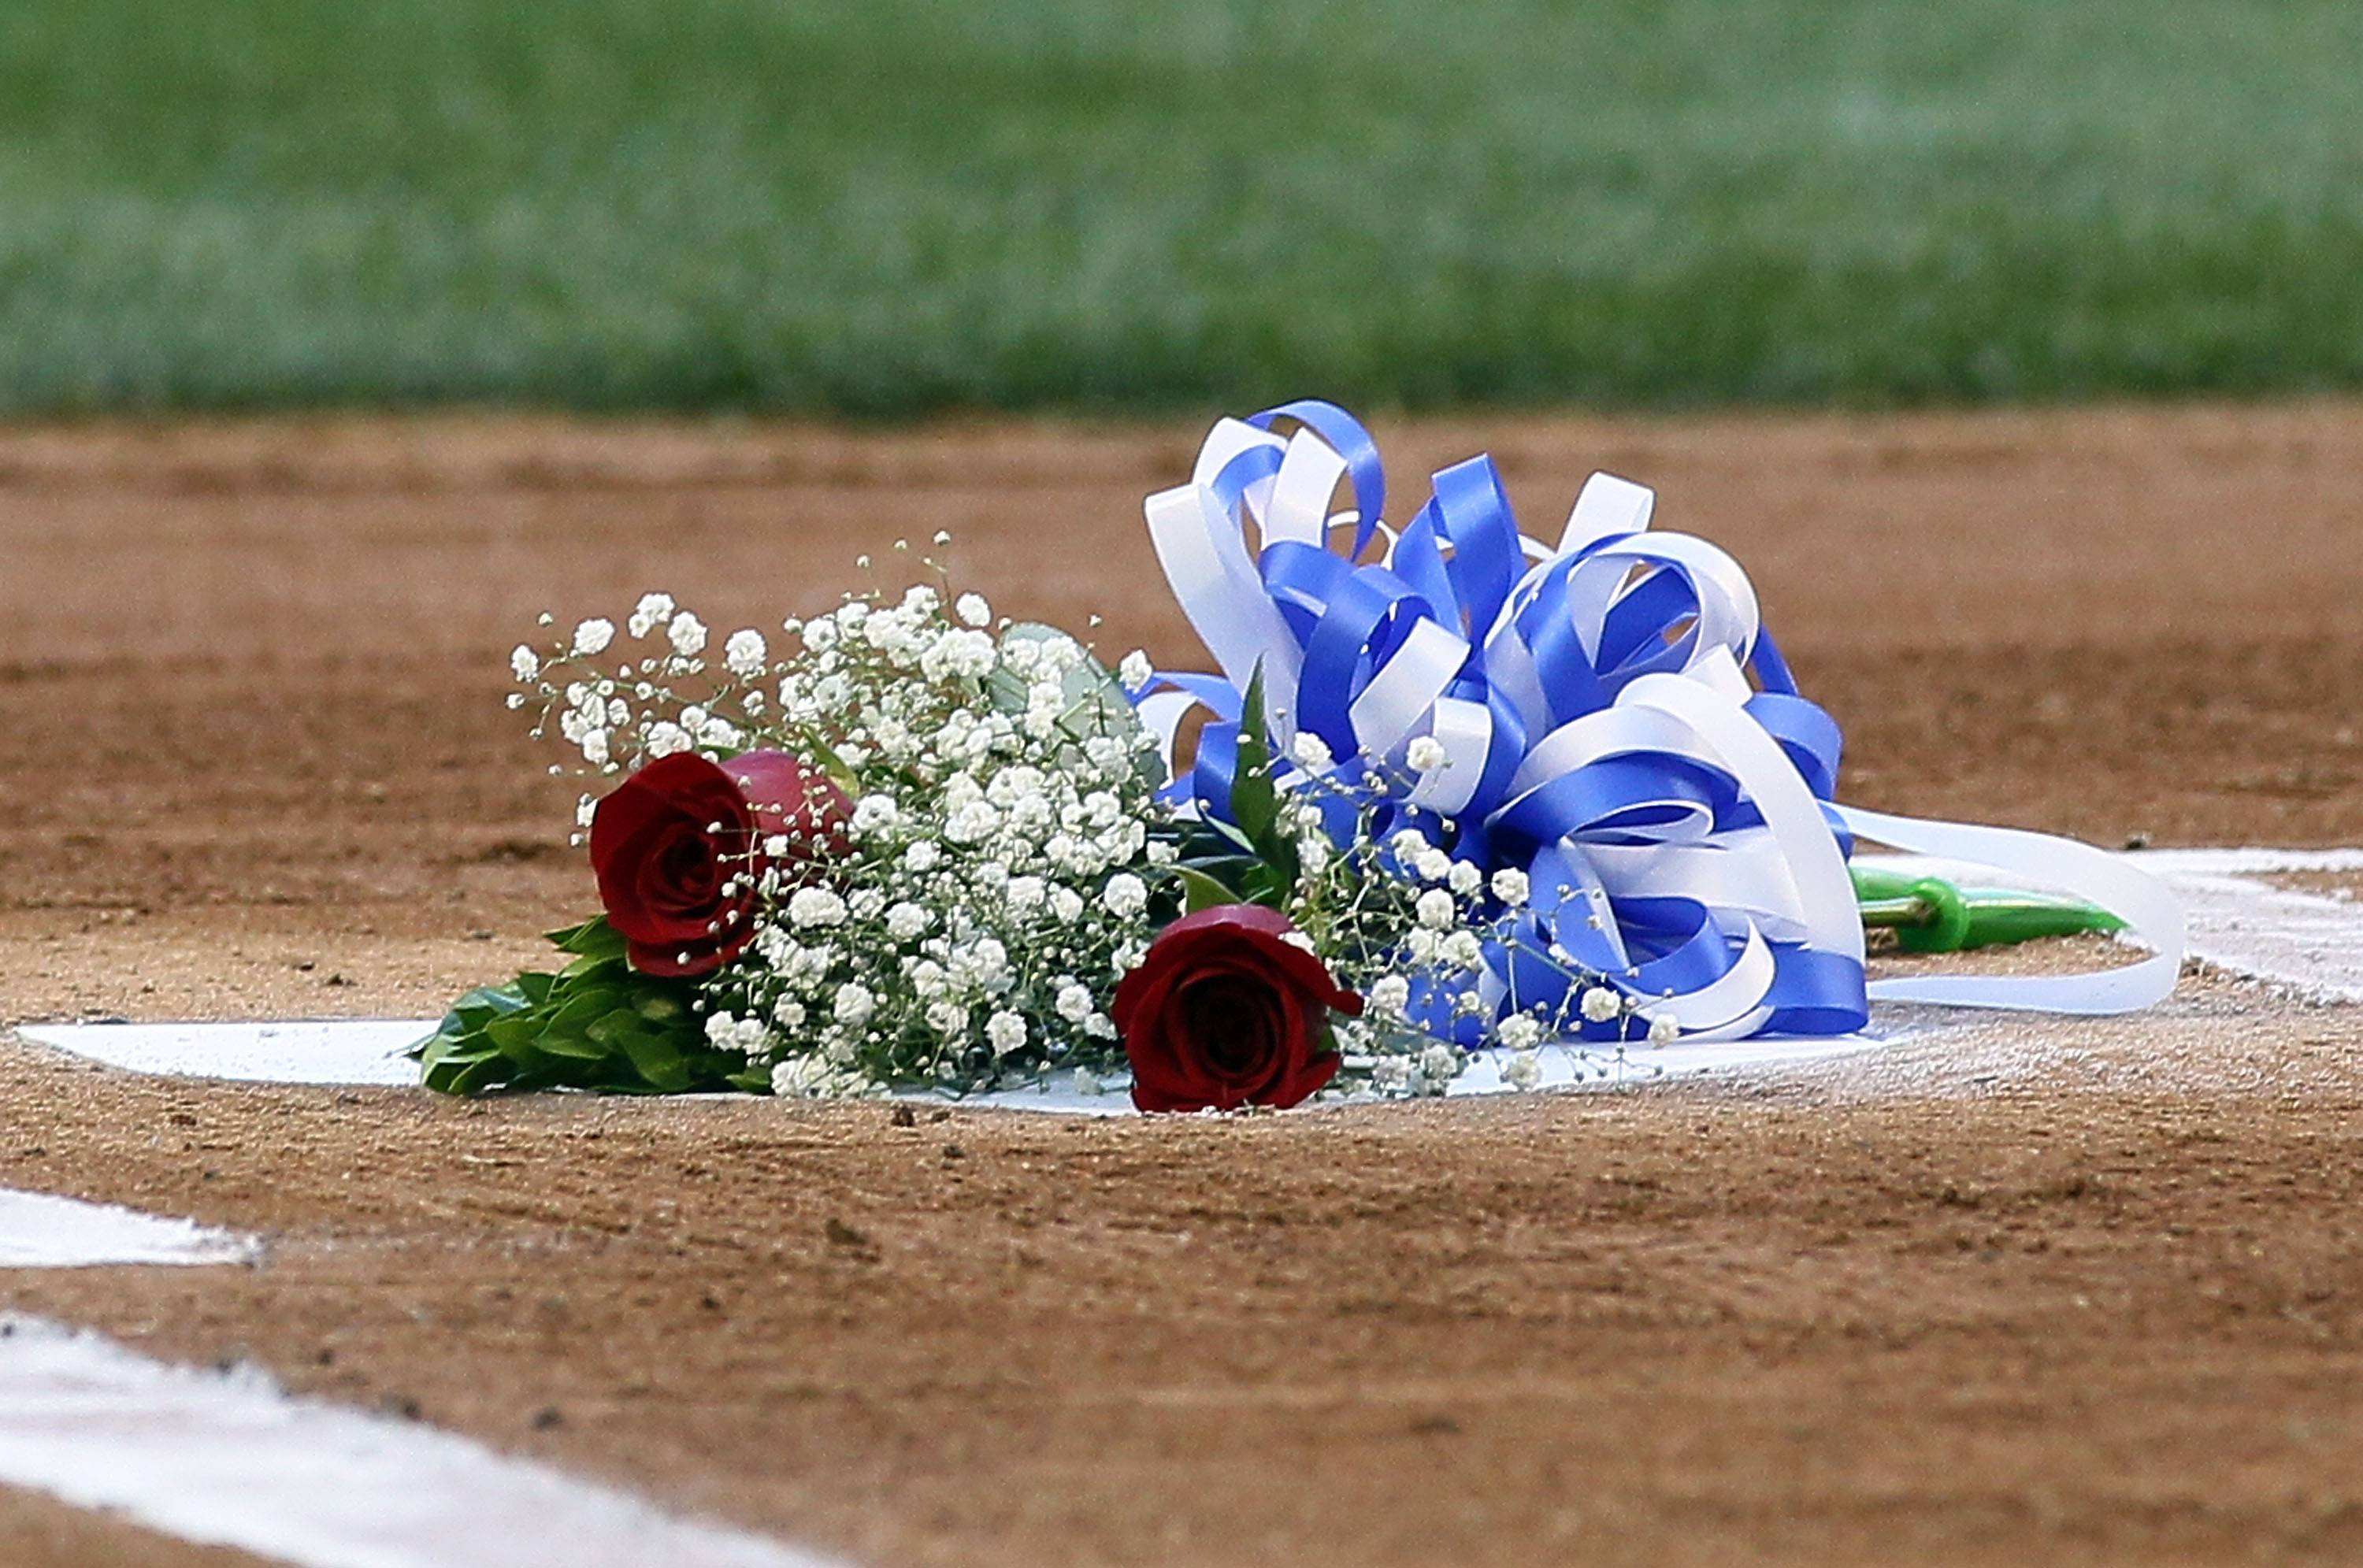 NEW YORK - JULY 16:  Two roses honoring the late owner George Steinbrenner of the New York Yankees and Yankee Stadium public address announcer Bob Sheppard are seen on home plate prior to the game against the Tampa Bay Rays on July 16, 2010 at Yankee Stad